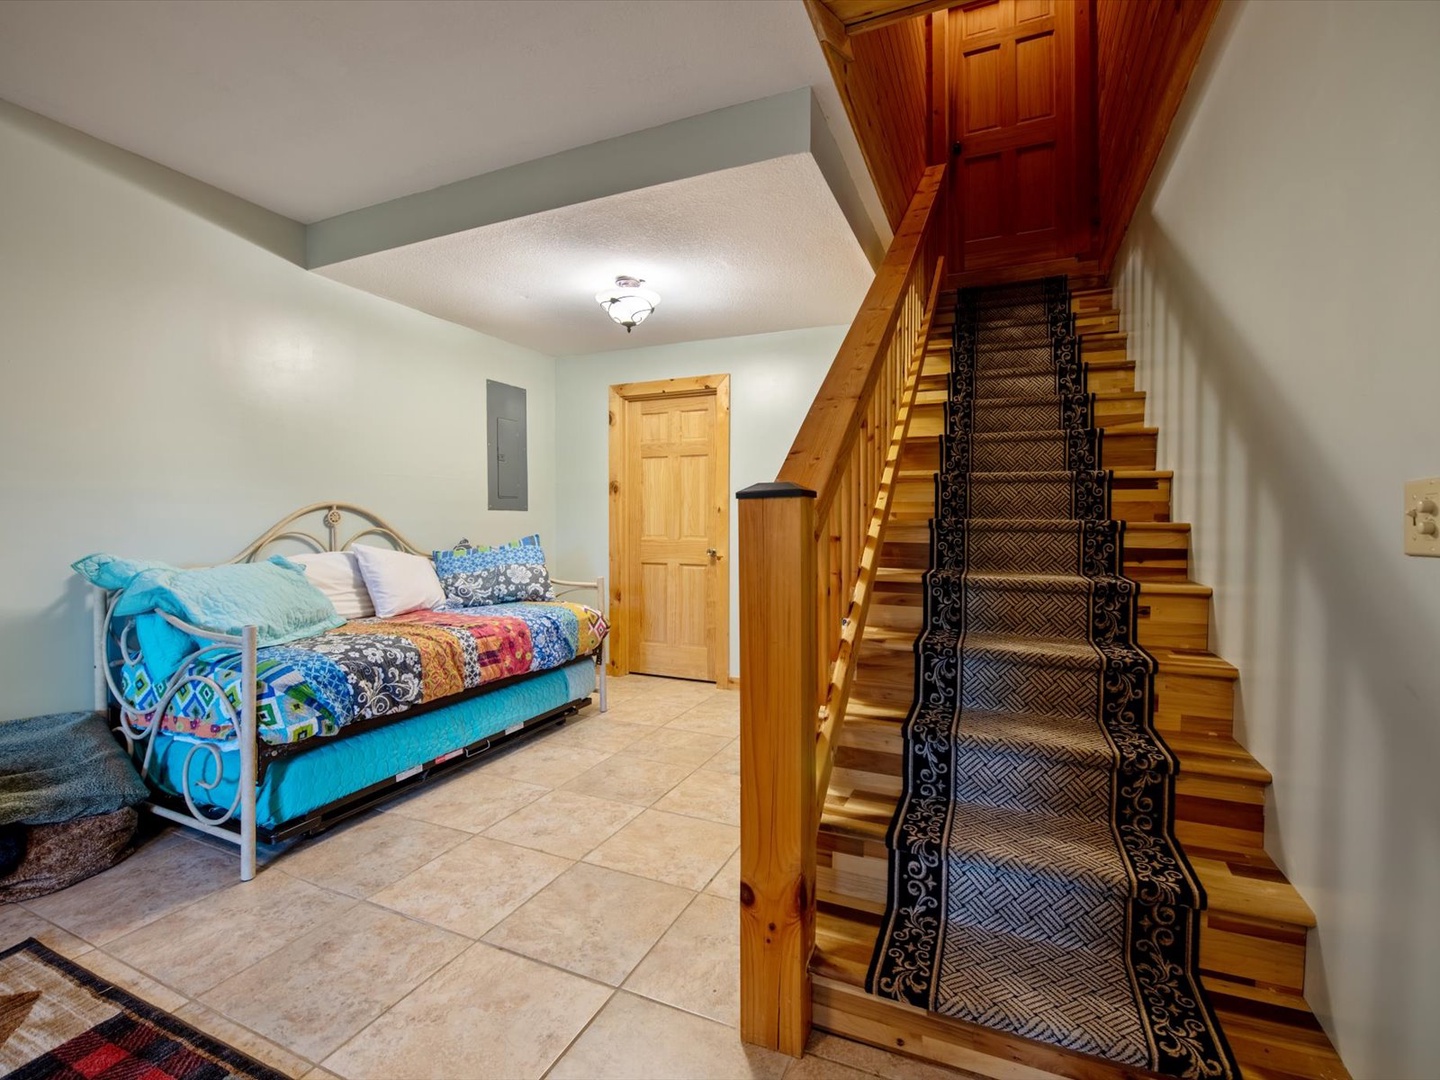 License 2 Chill - Lower Level Living Room Staircase